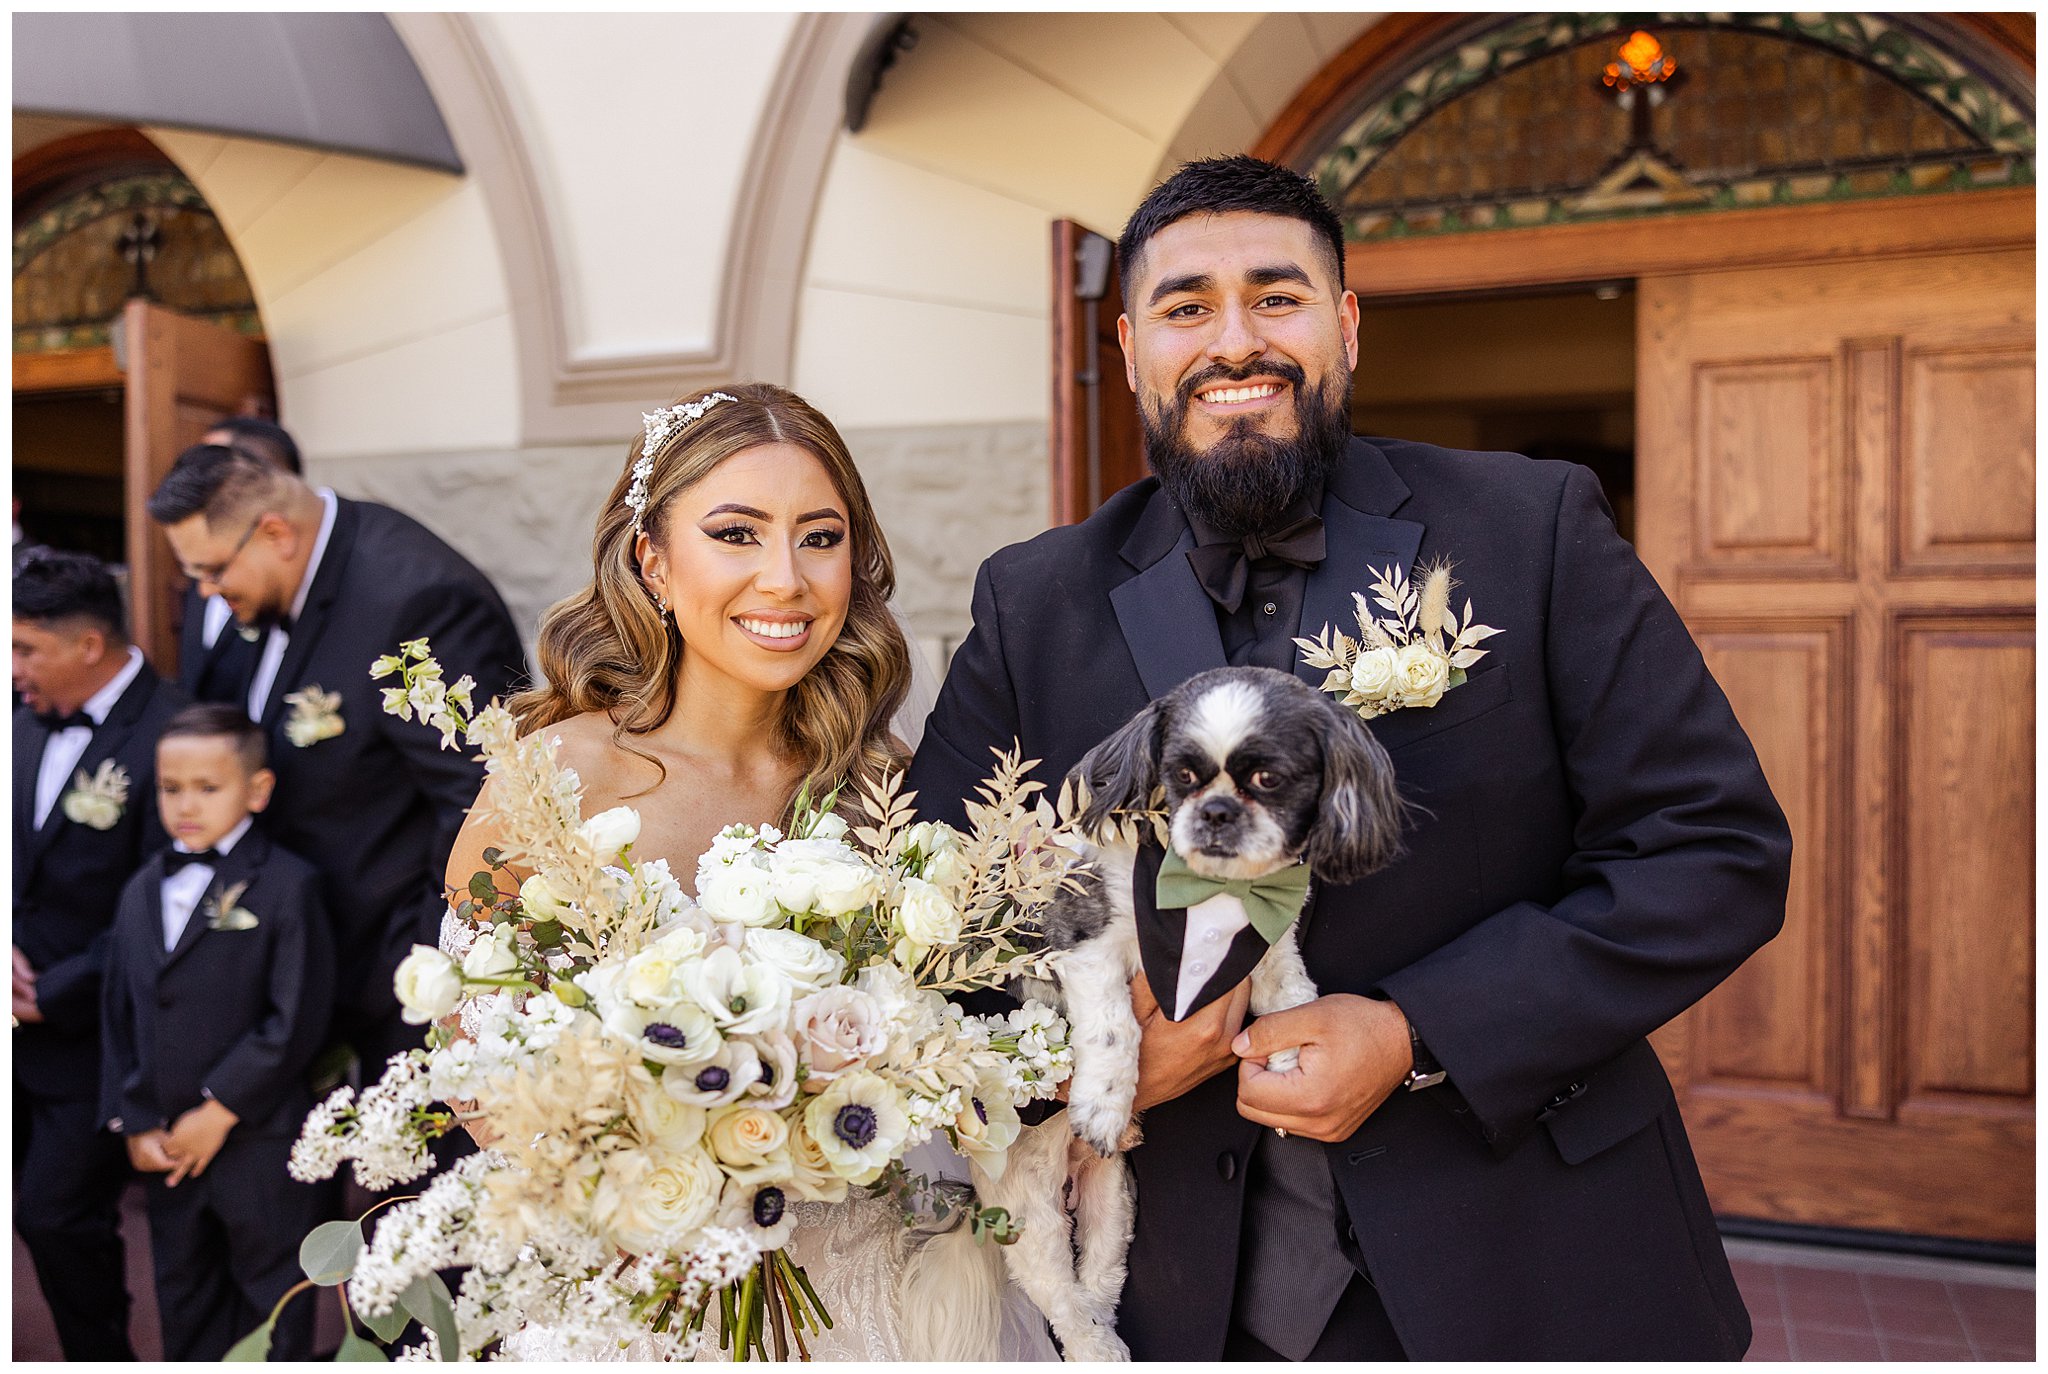 St John the Baptist Church Chico CA The Barn at Old Colony Orland CA Wedding Glamor Traditional Classic Car Dog Bowtie Tequila Sweetheart Table April Spring Sage Green Black Orchard,